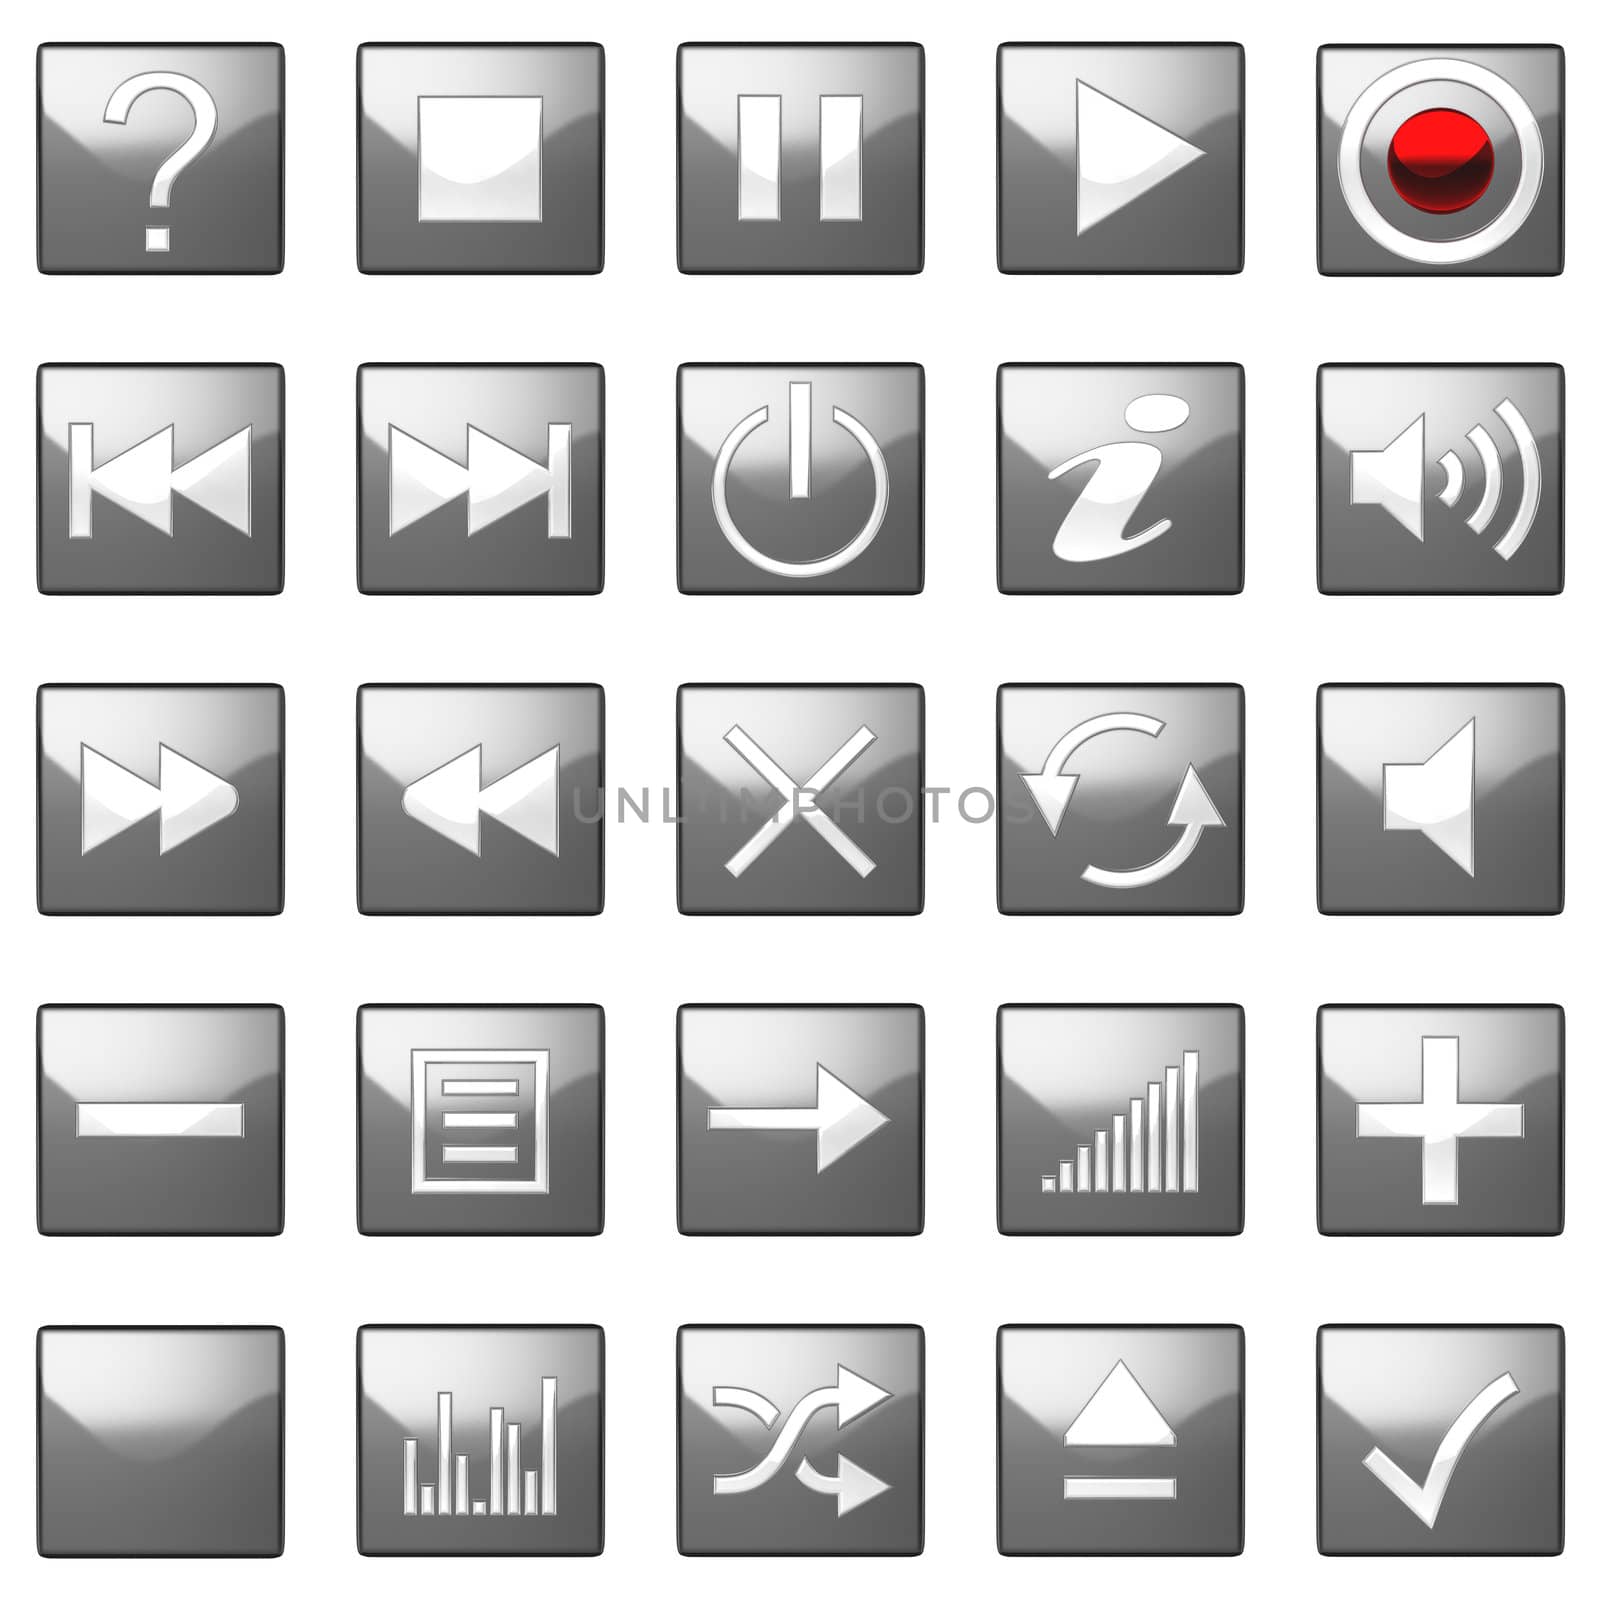 Square grey Control panel icons set isolated on black